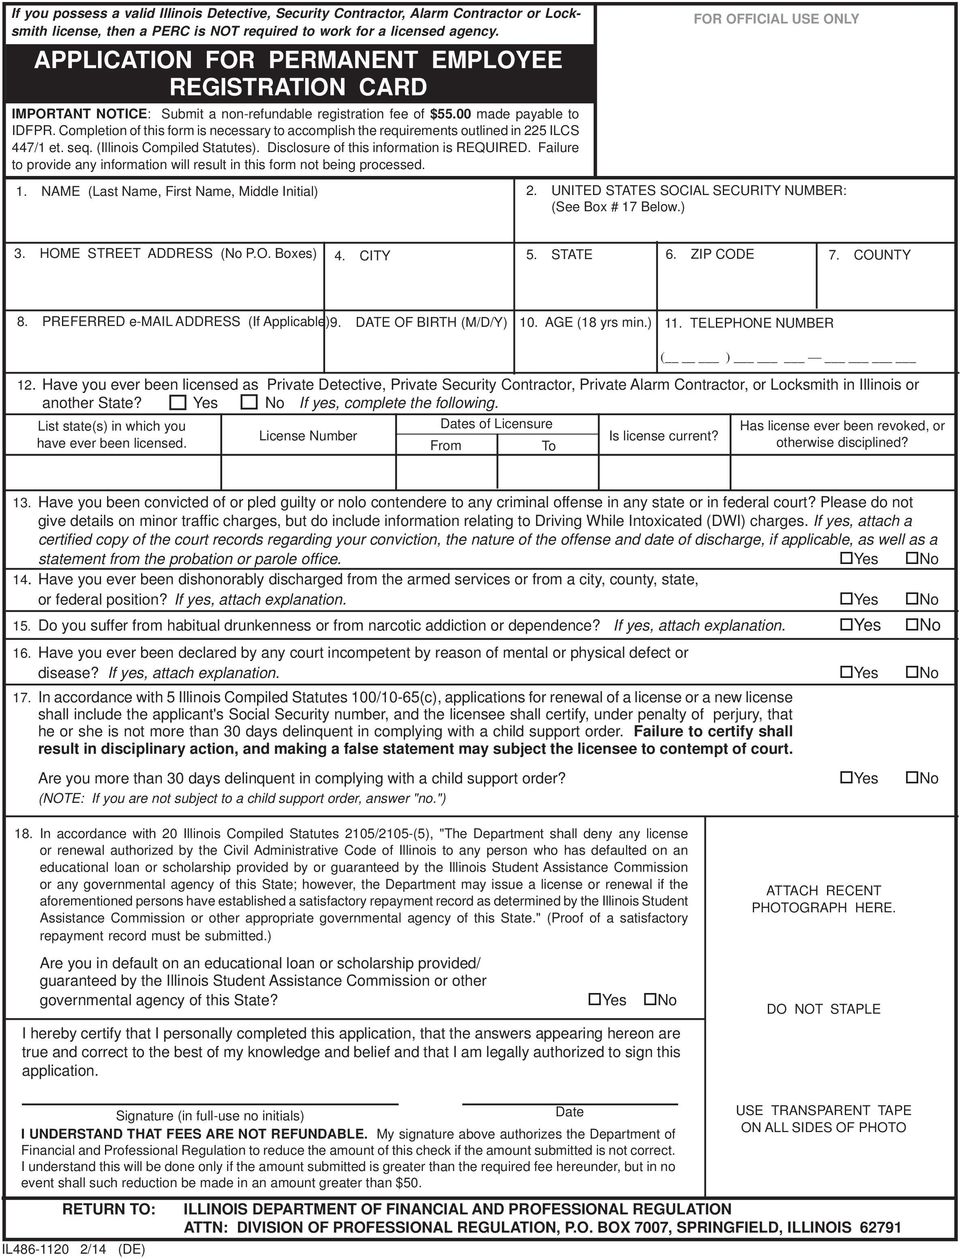 Completion of this form is necessary to accomplish the requirements outlined in 225 ILCS 447/1 et. seq. (Illinois Compiled Statutes). Disclosure of this information is REQUIRED.